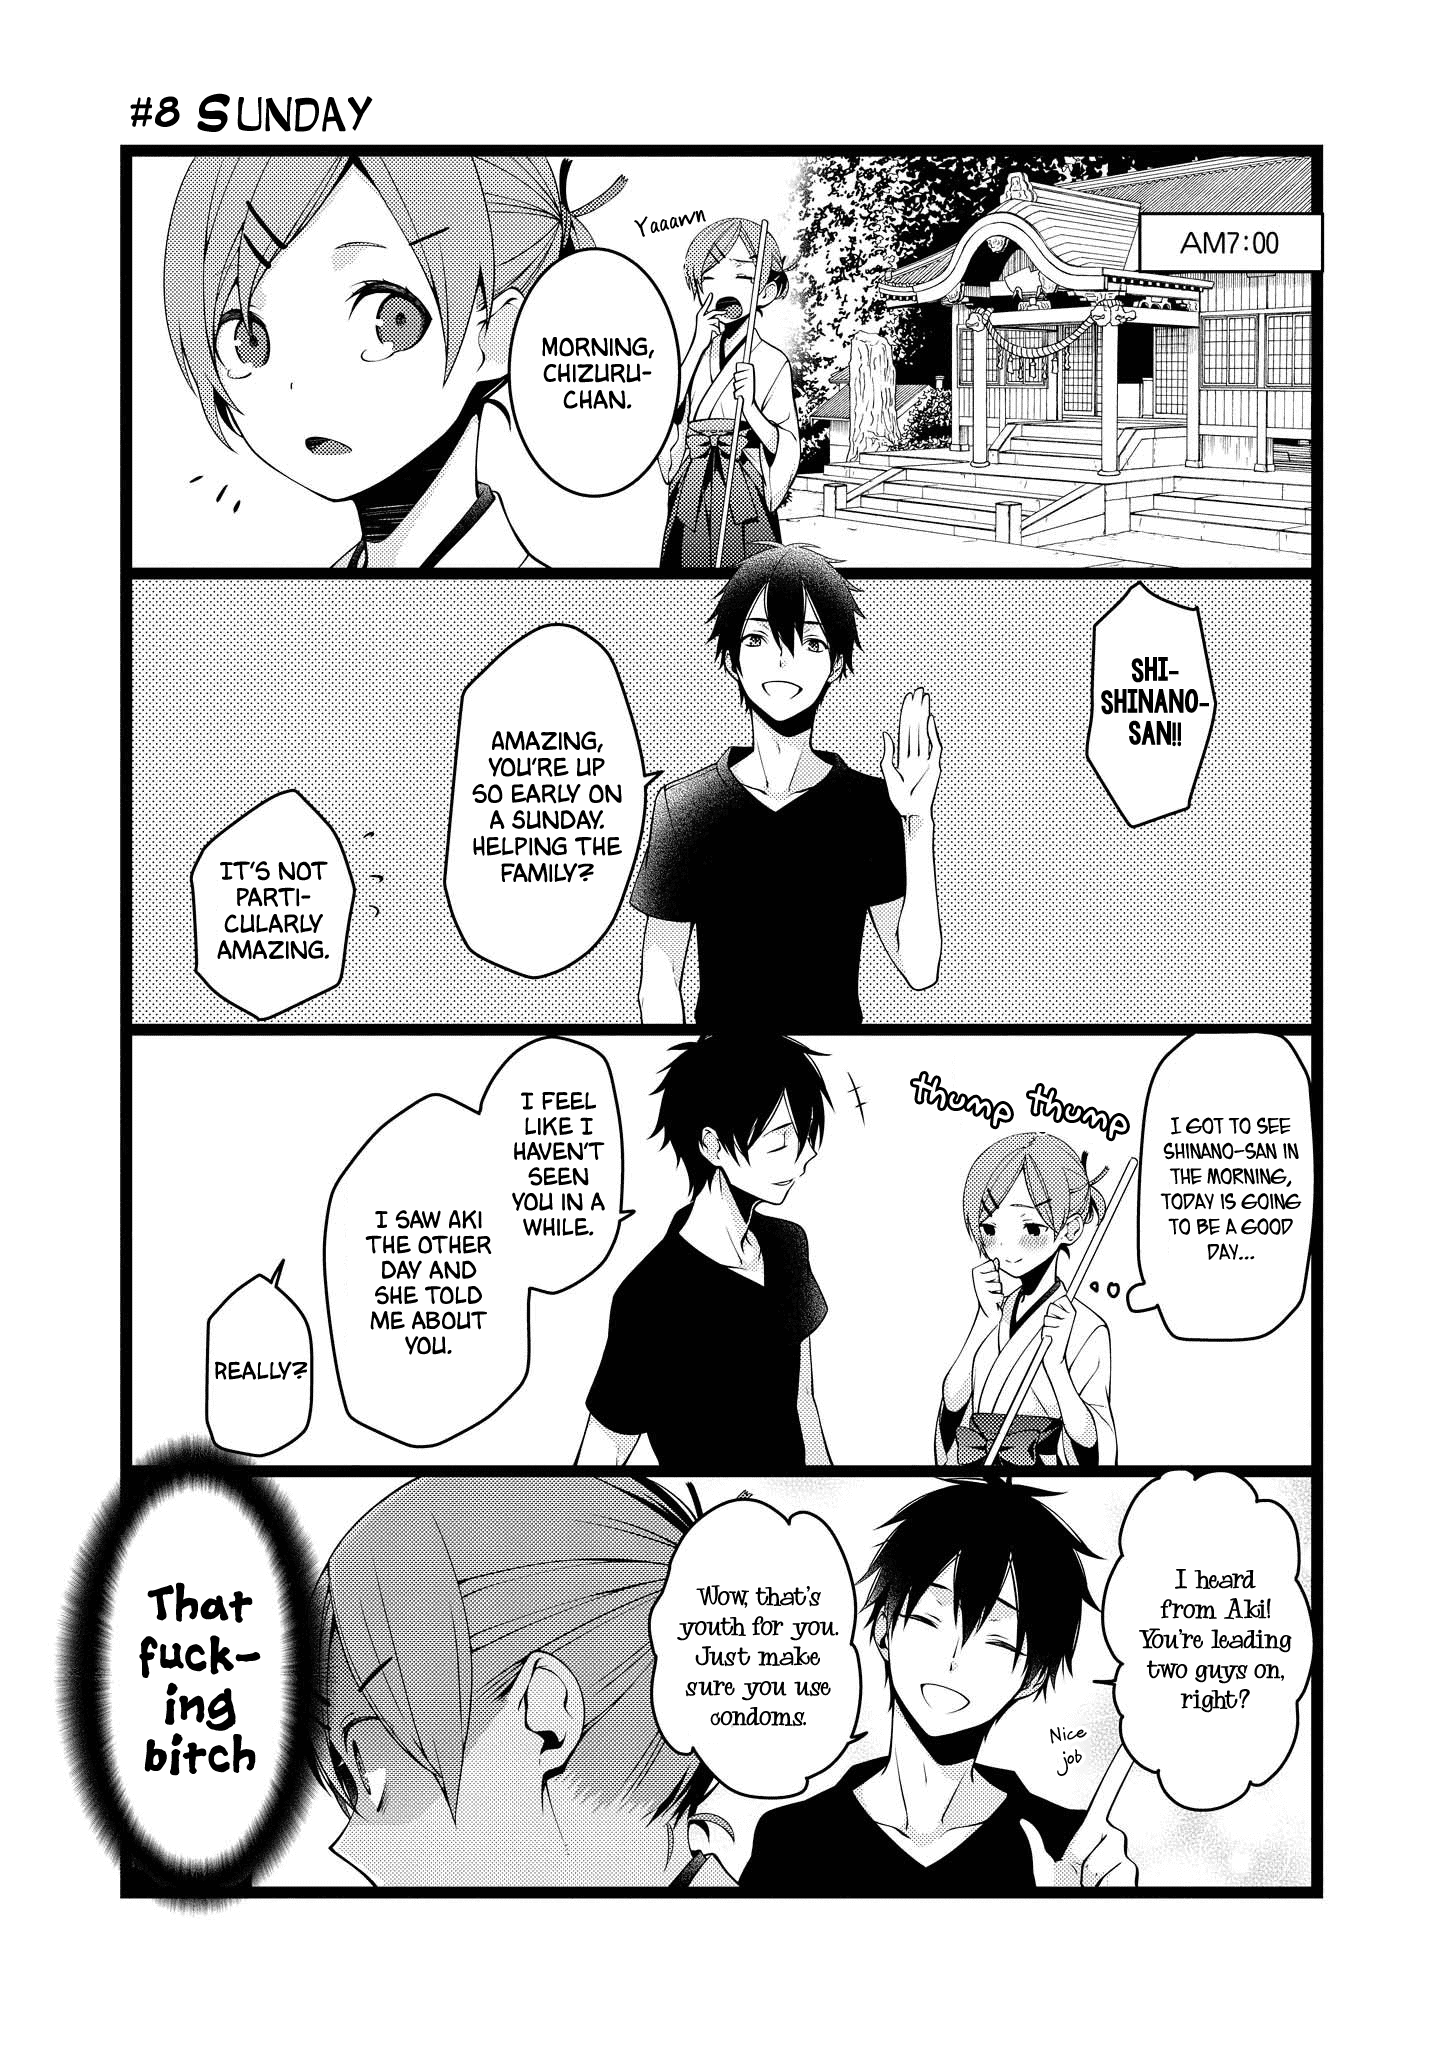 A Pervert In Love Is A Demon. - Page 1